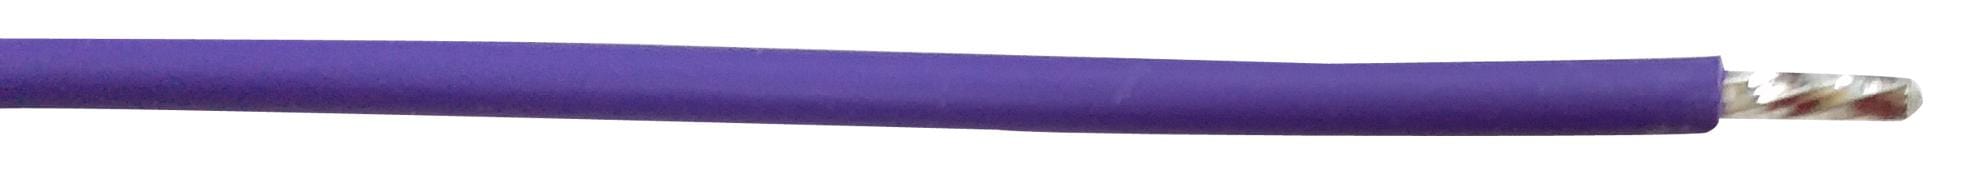 PRO POWER Single Wire PP002313 HOOK-UP WIRE, 20AWG, PURPLE, 305M, 300V PRO POWER 2919472 PP002313